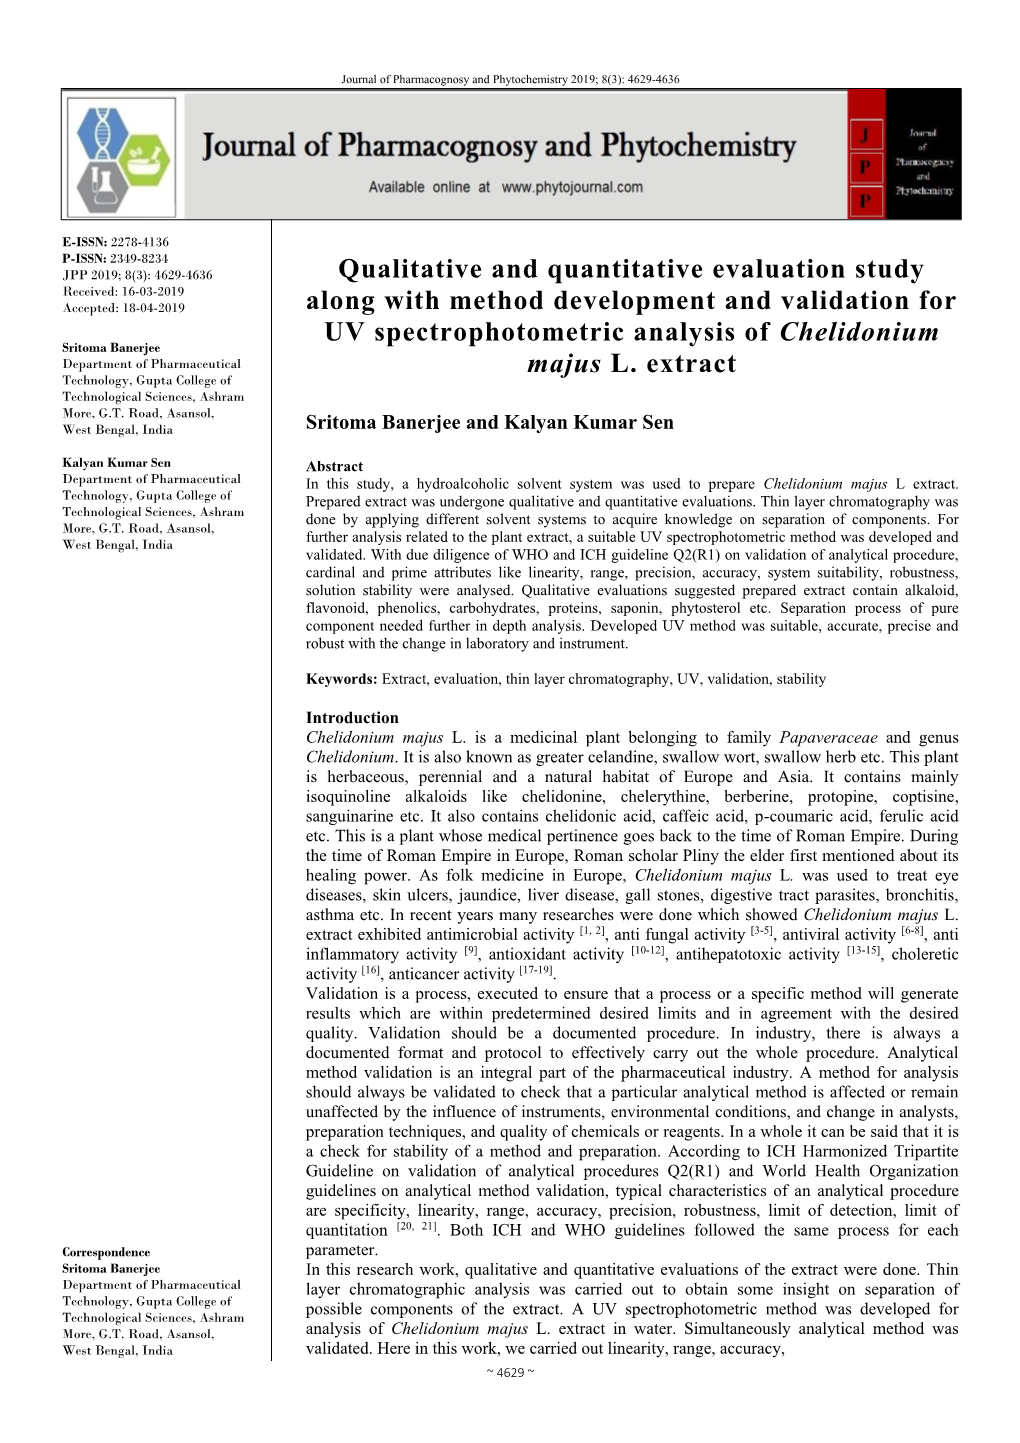 Qualitative and Quantitative Evaluation Study Along with Method Development and Validation for UV Spectrophotometric Analysis Of